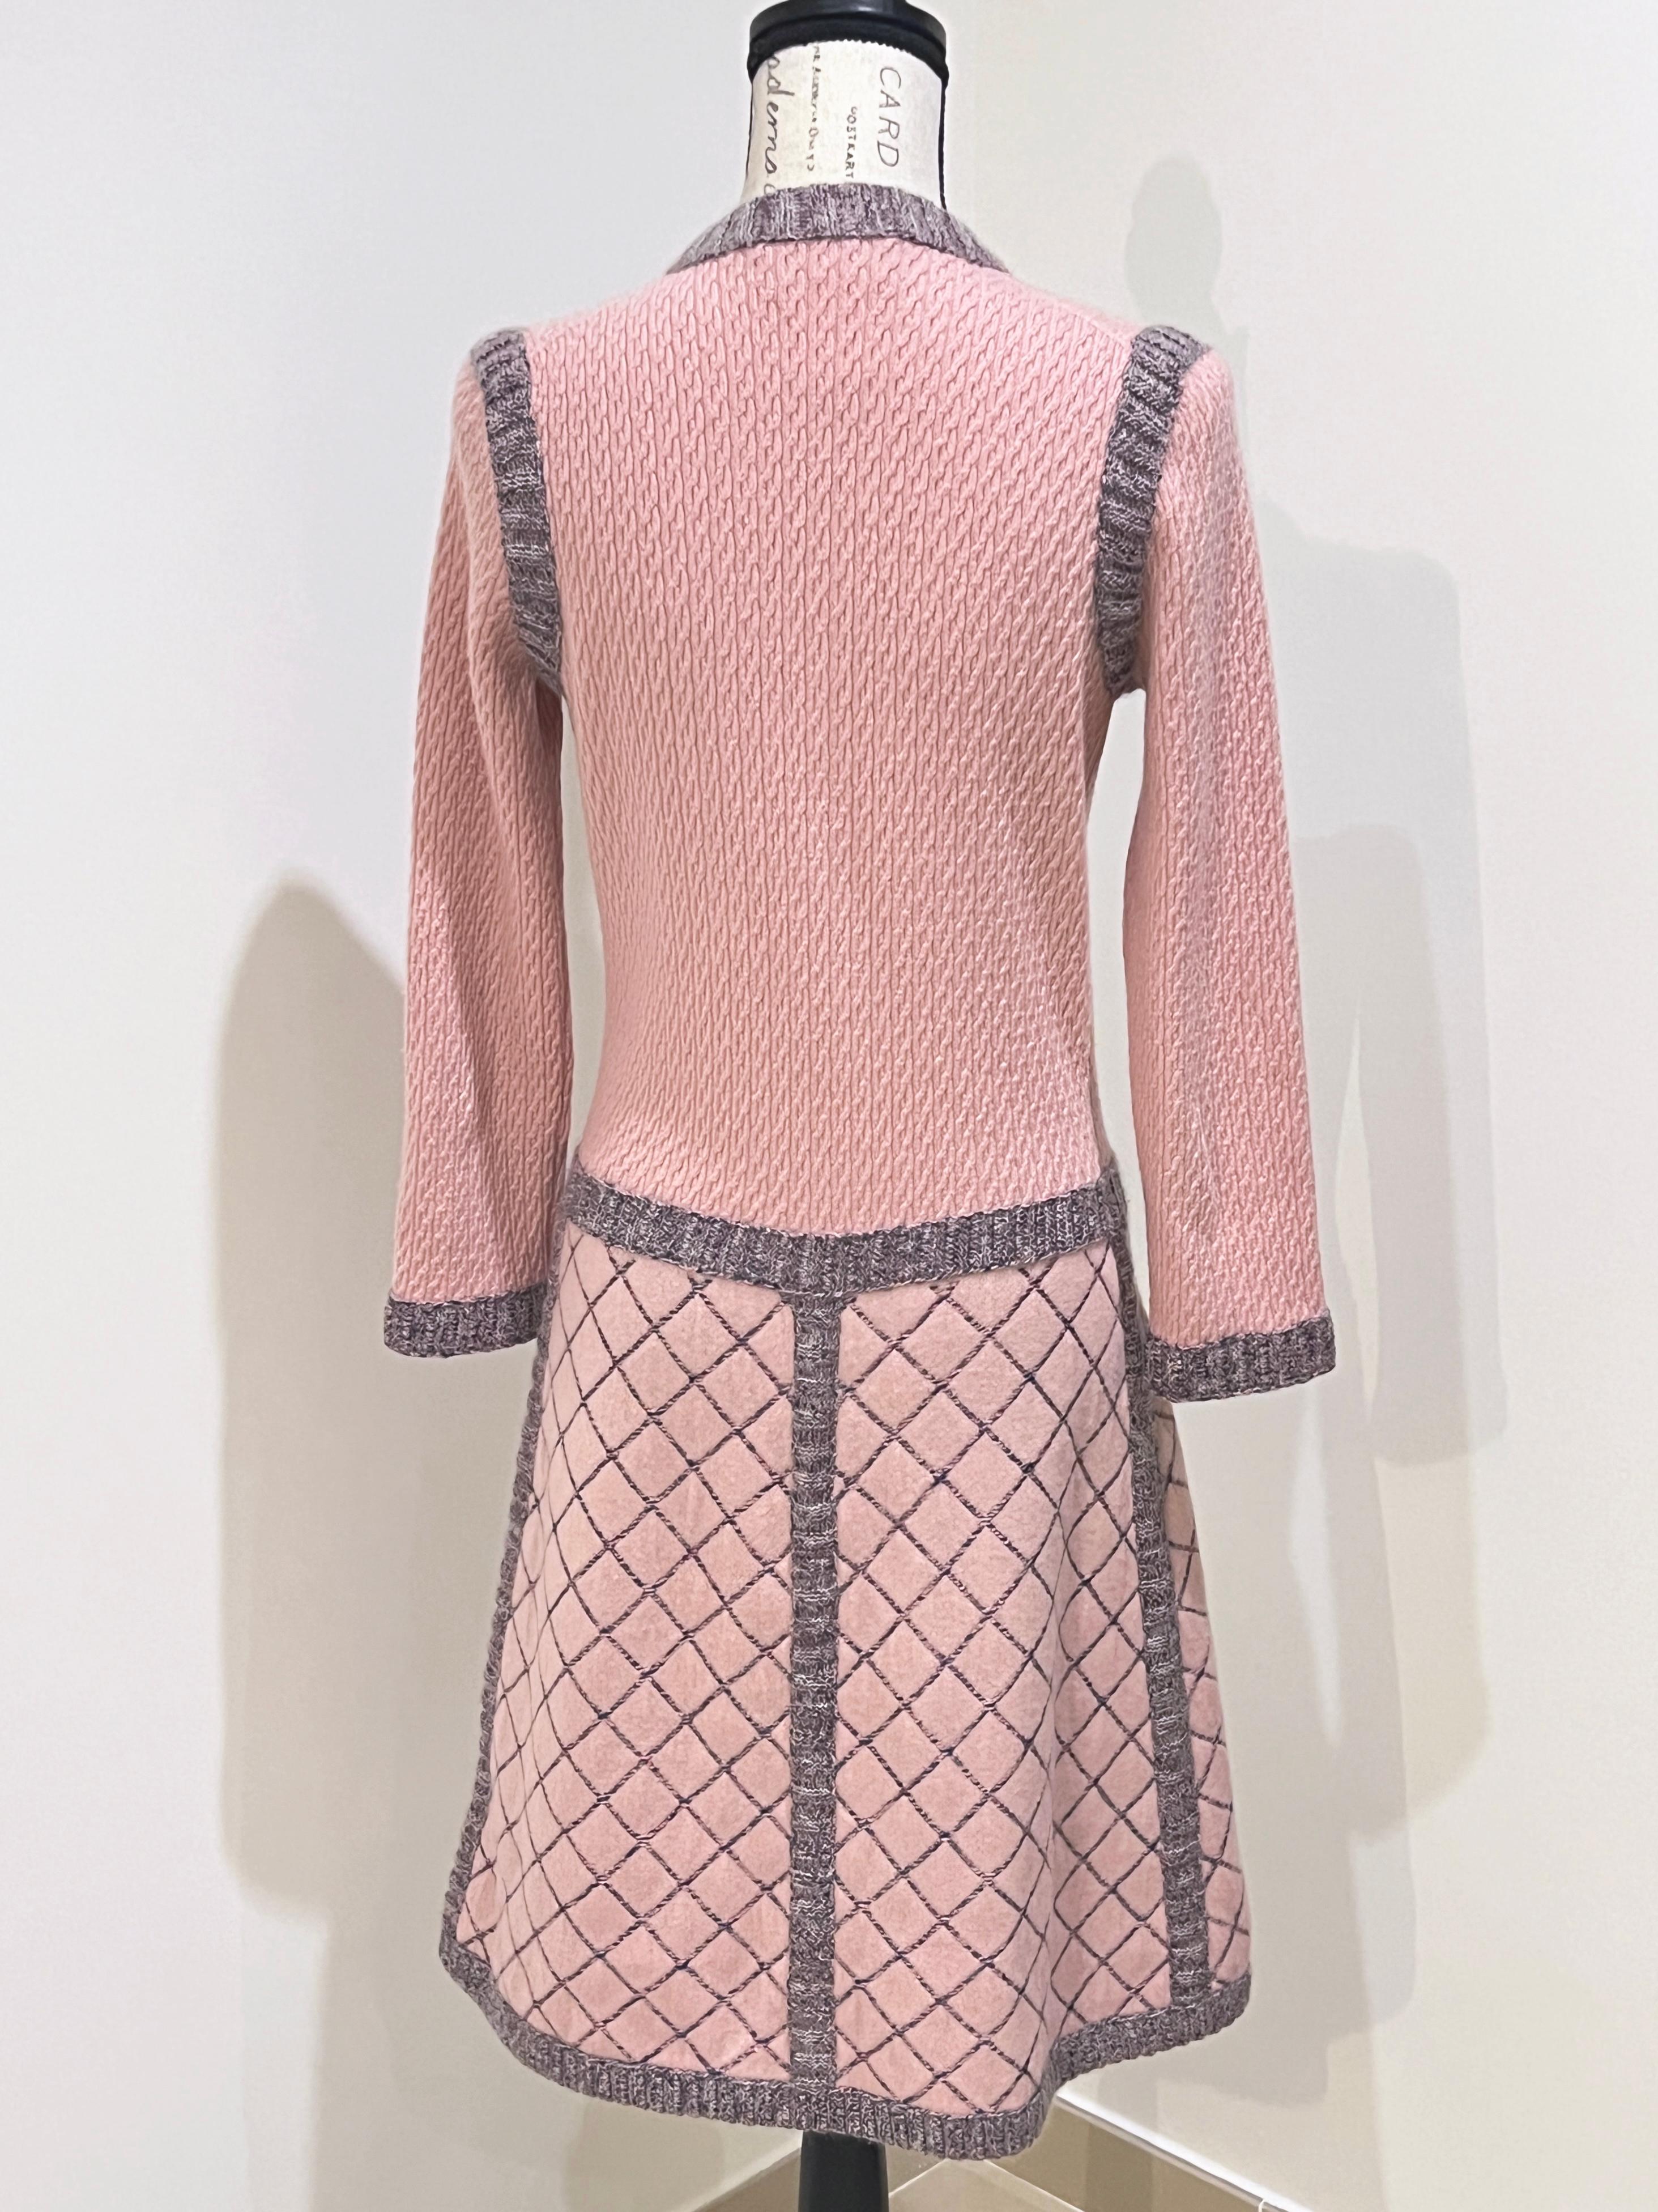 Chanel Iconic Coco Brasserie Quilted Jacket Dress For Sale 15